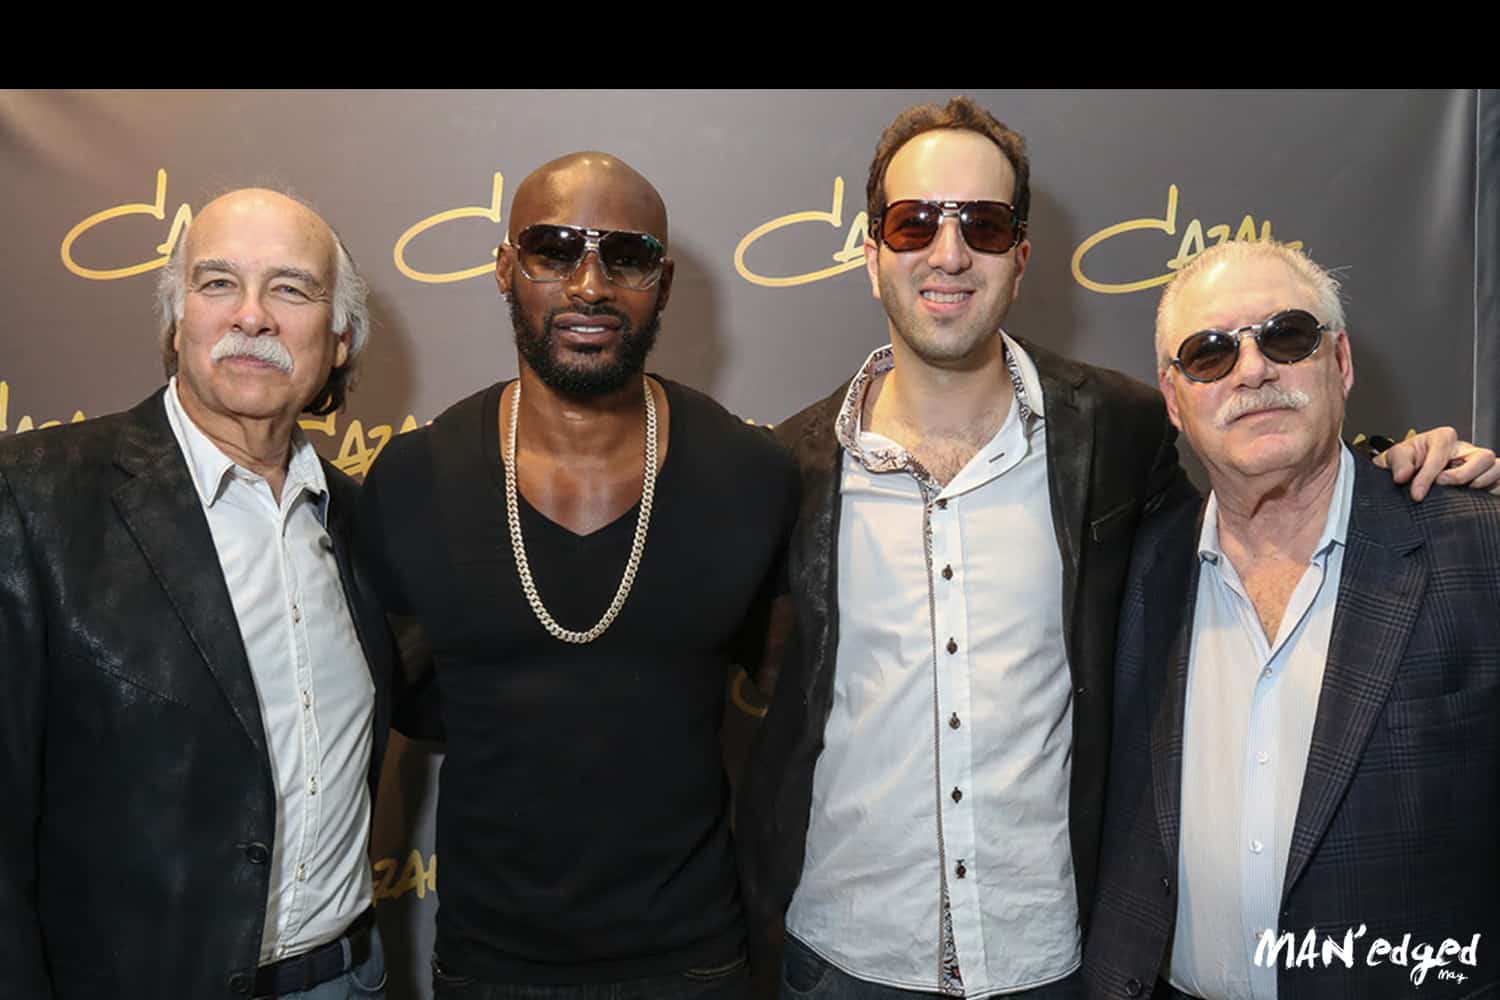 Paul Shyer (left), Tyson Beckford, Jason Shyer, and Roger Shyer of Ese Eyewear at the Cazal Official Event